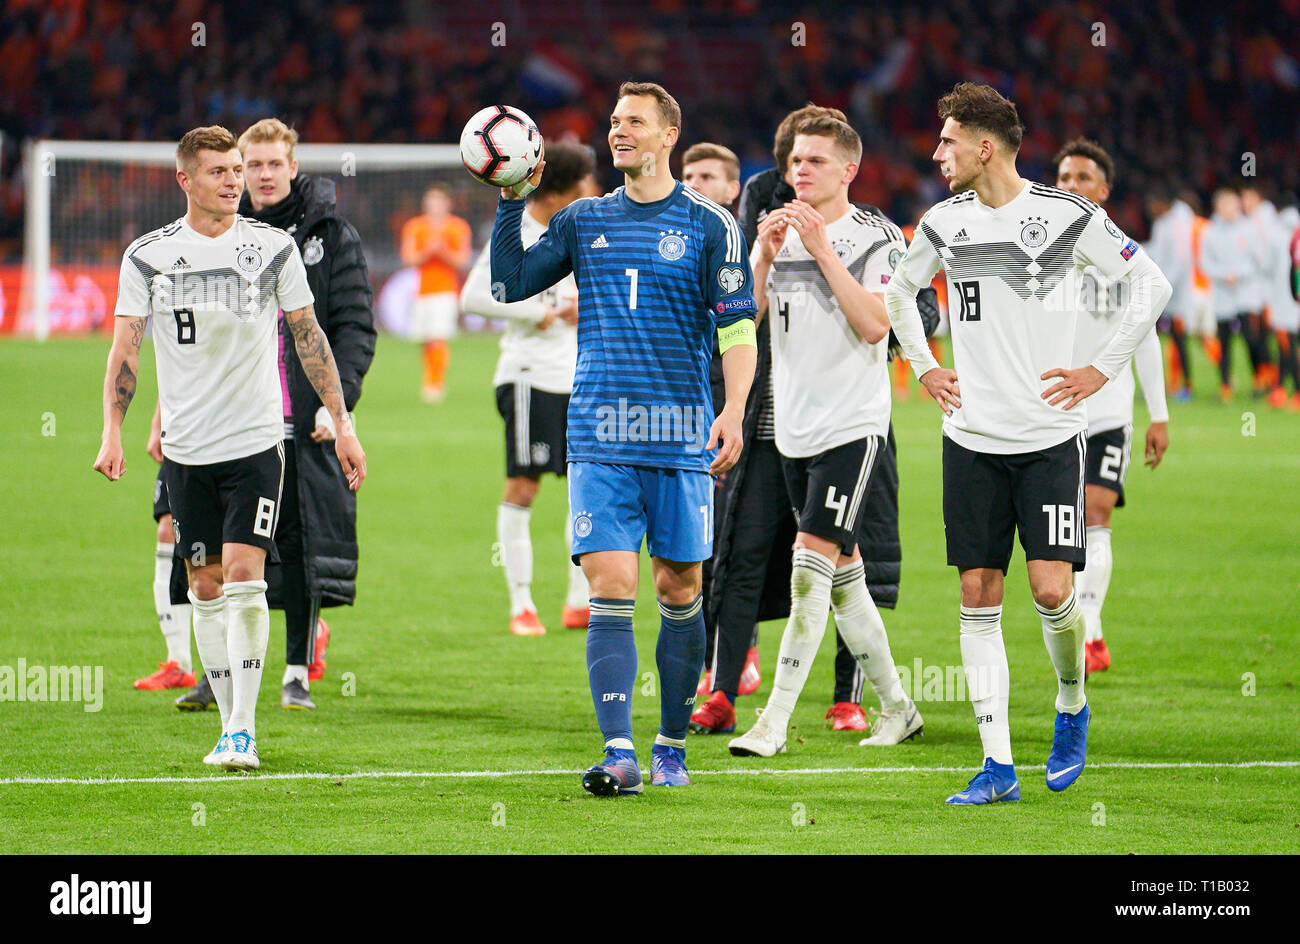 Amsterdam, Netherlands. 24th Mar, 2019. Celebration after the match: Manuel NEUER, DFB 1 goalkeeper, Matthias GINTER, DFB 4 Leon GORETZKA, DFB 18 Toni KROOS, DFB 8 NETHERLANDS - GERMANY 2-3 Important: DFB regulations prohibit any use of photographs as image sequences and/or quasi-video. Qualification for European Championships, EM Quali, 2020 Season 2018/2019, March 24, 2019 in Amsterdam, Netherlands. Credit: Peter Schatz/Alamy Live News Stock Photo